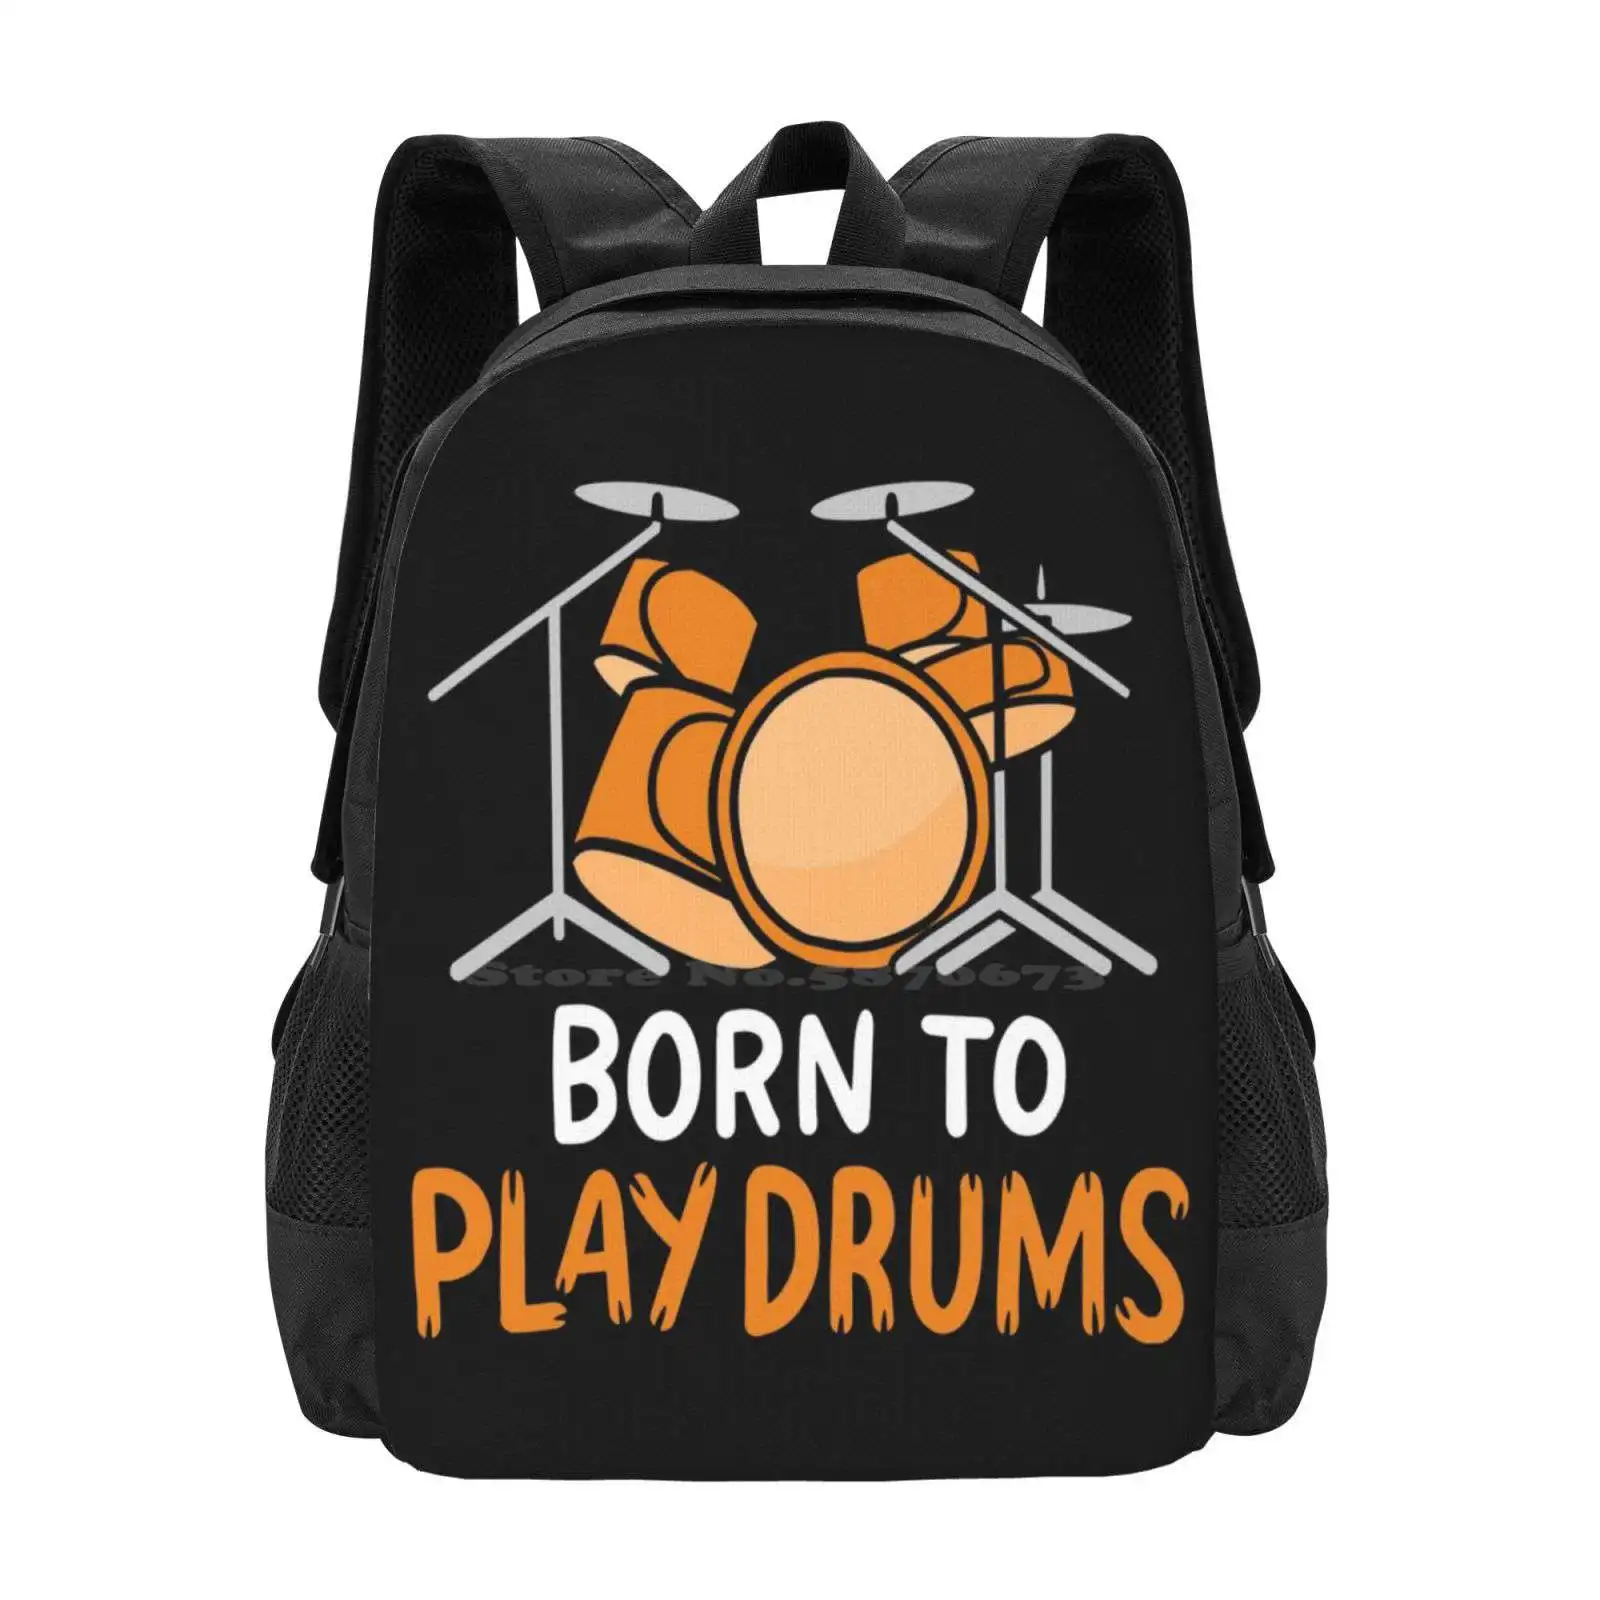 

Born To Play Drums | Drum Player Percussionist New Arrivals Unisex Bags Student Bag Backpack Funny Drummer Drum Set Drumming